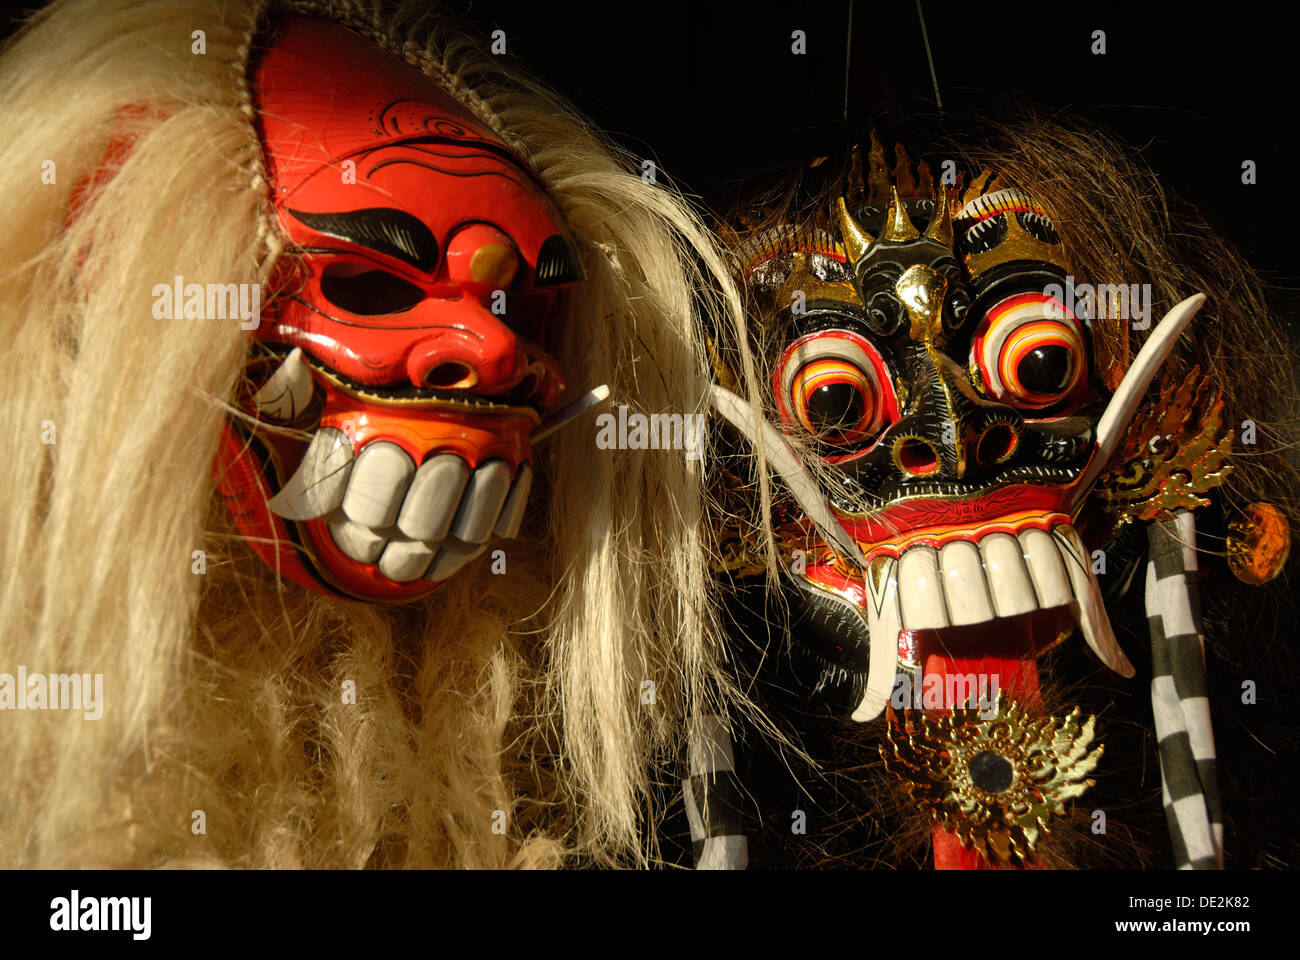 Arts and culture, Barong and Rangda masks, terrible mystical mythical creatures, Ubud, Bali, Indonesia, Southeast Asia, Asia Stock Photo